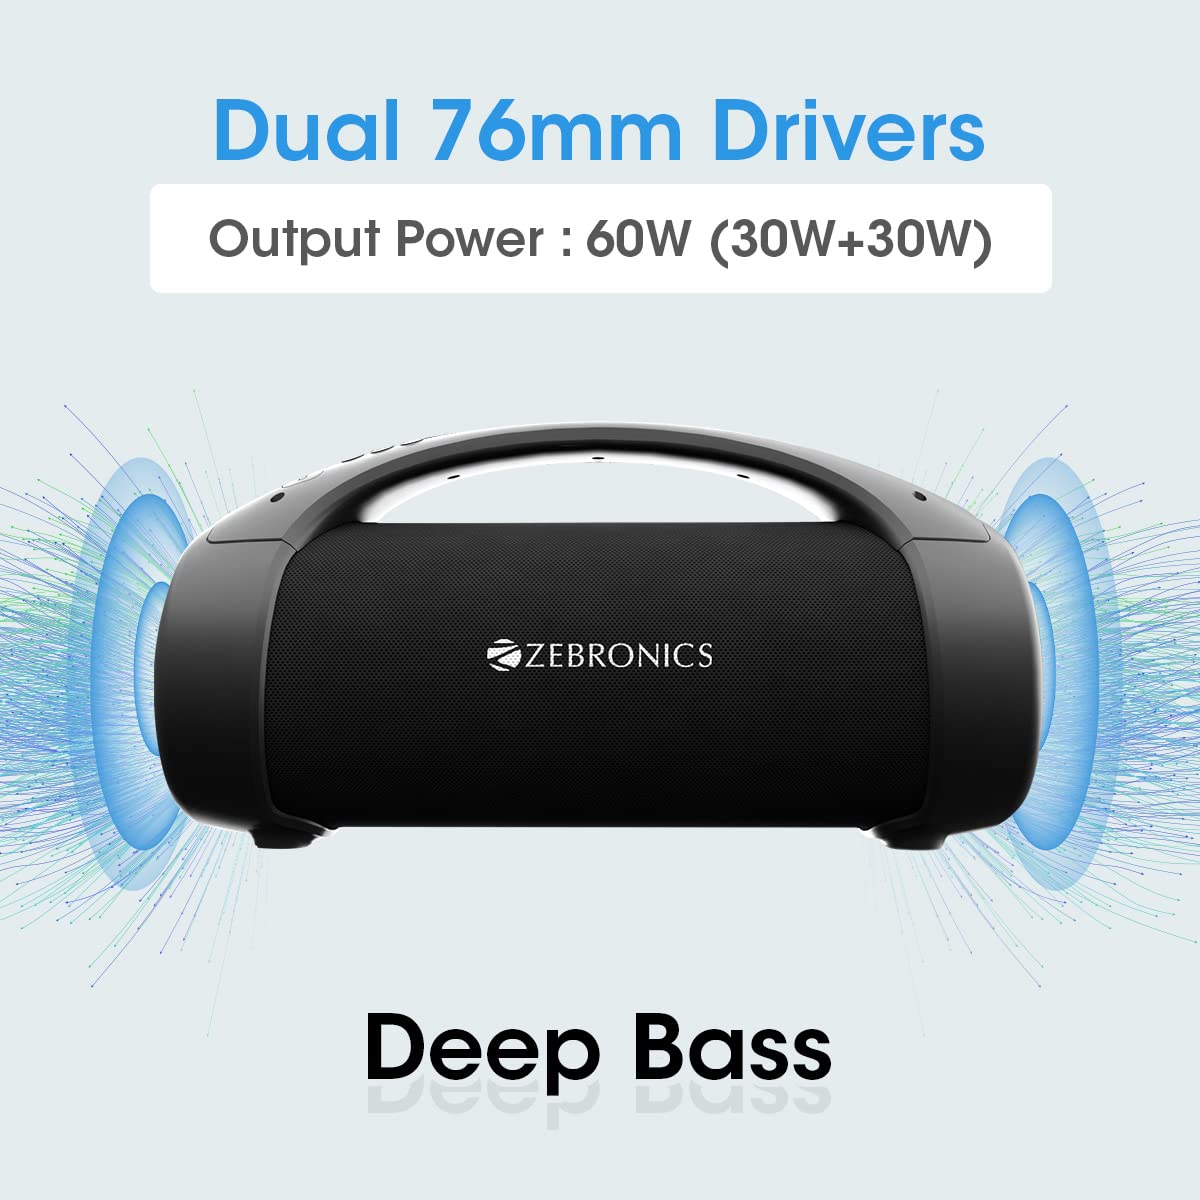 Zebronics Sound Feast 400 Bluetooth v5.0 Portable Speaker with 60W Output, 11 Hours Backup, Voice Assistant, TWS, IPX5 Waterproof, Call Function, RGB Light, AUX, USB, FM Radio and Type C